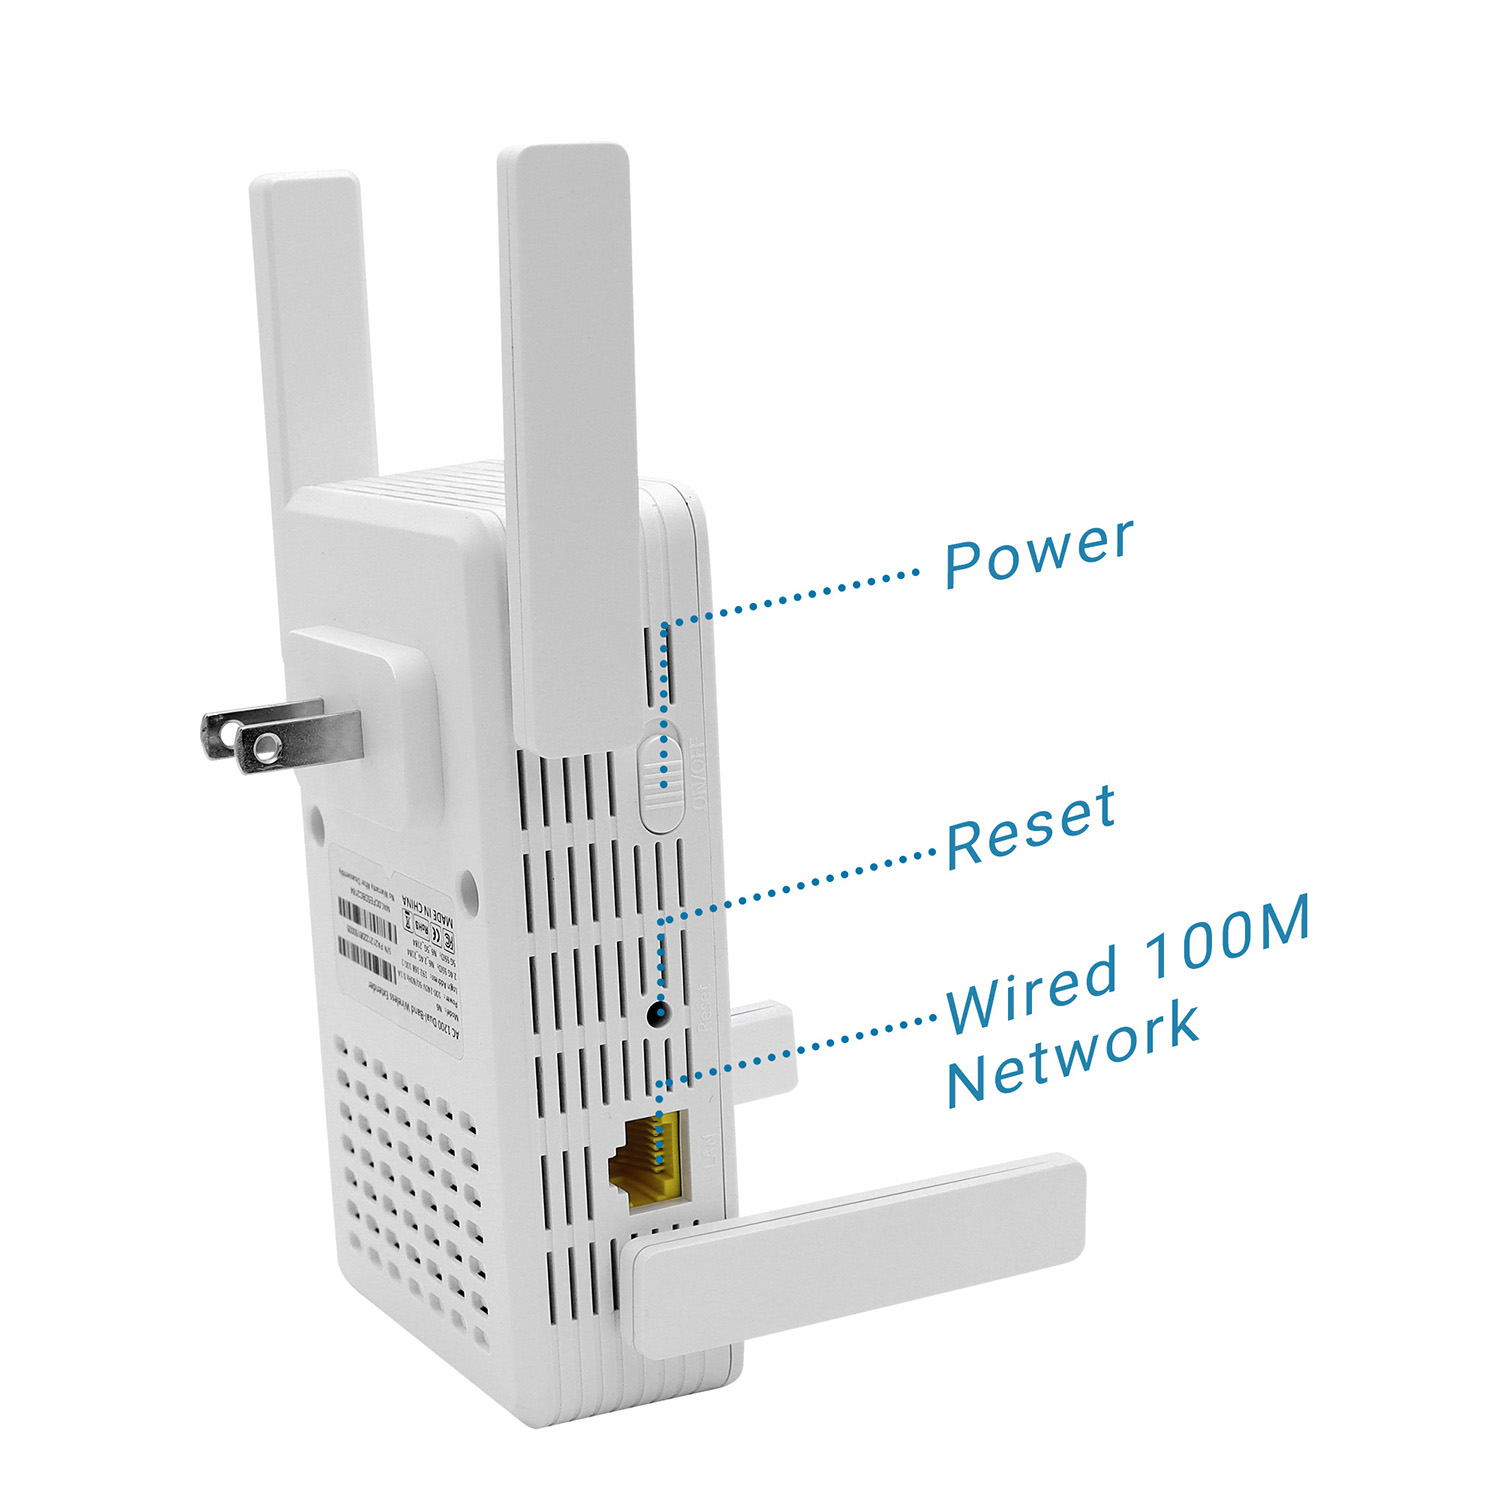 Boost Your WiFi Coverage with the Cutting-Edge YINUO-LINK N6 AC1200 WiFi Range Extender